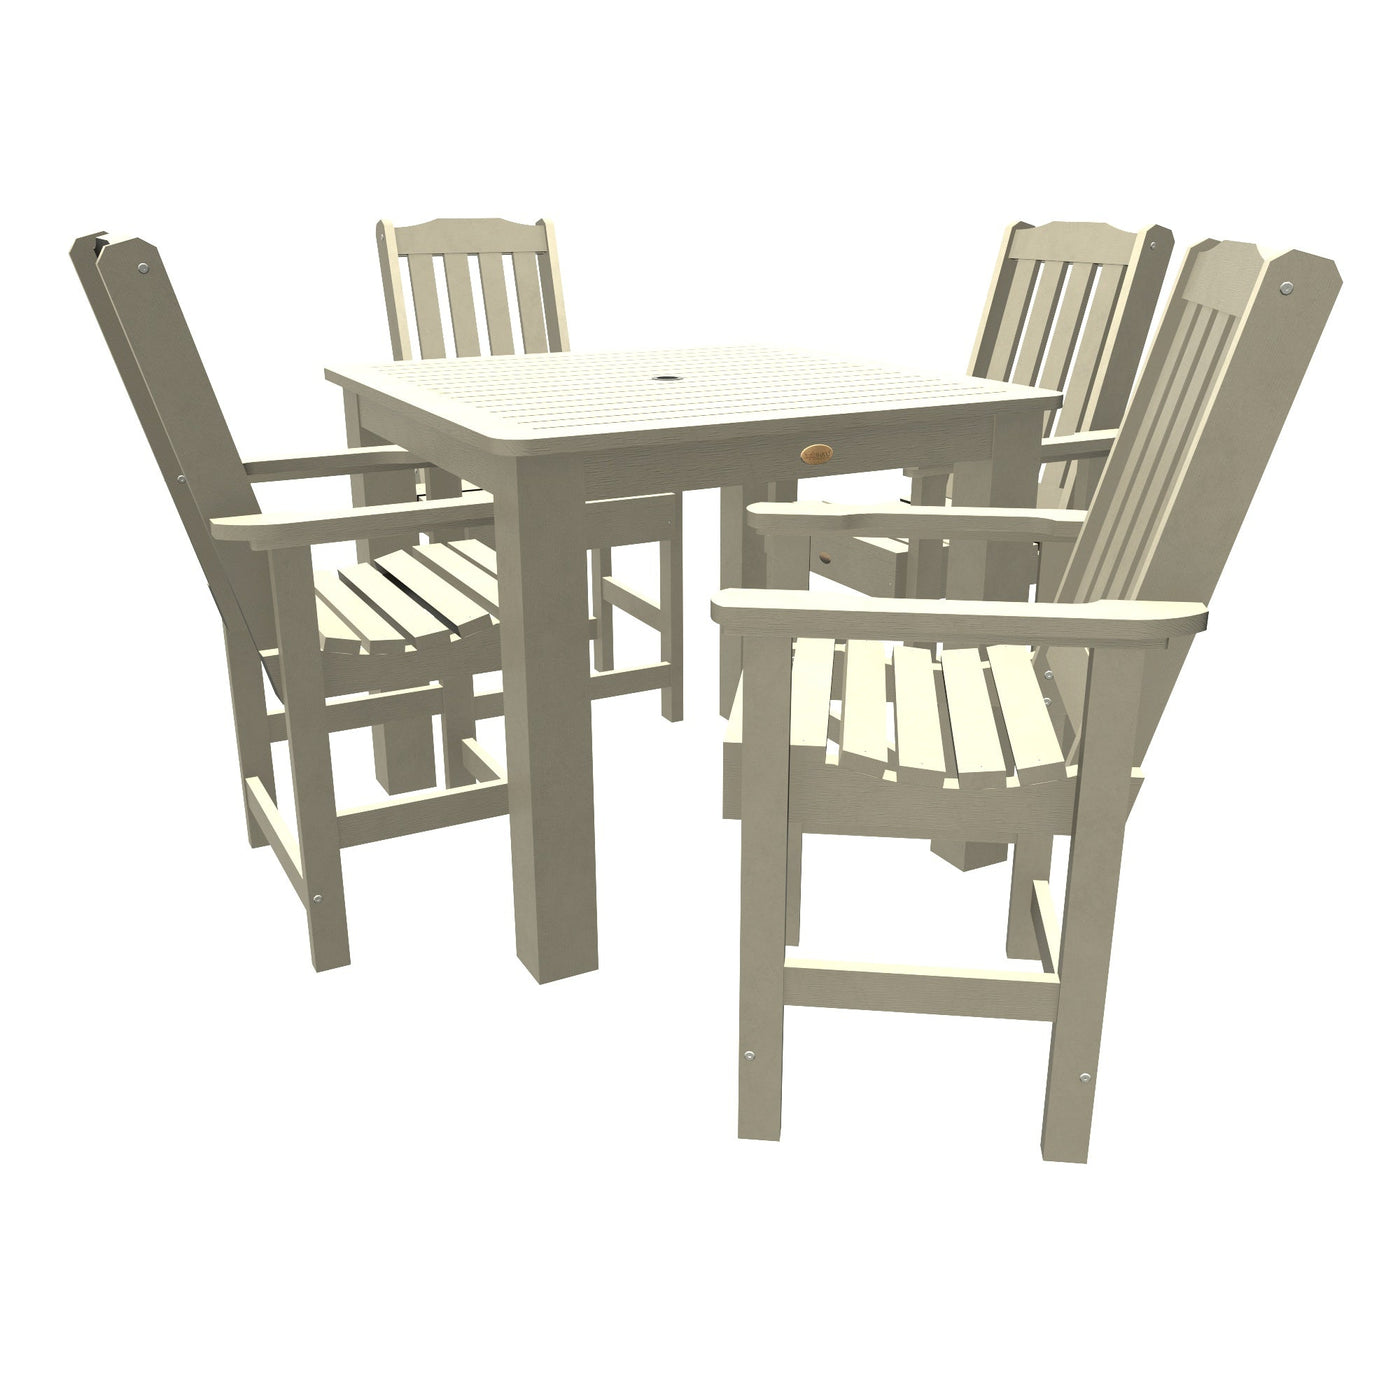 Lehigh 5pc Square Dining Set 42in x 42in - Counter Height Dining Highwood USA Whitewash 